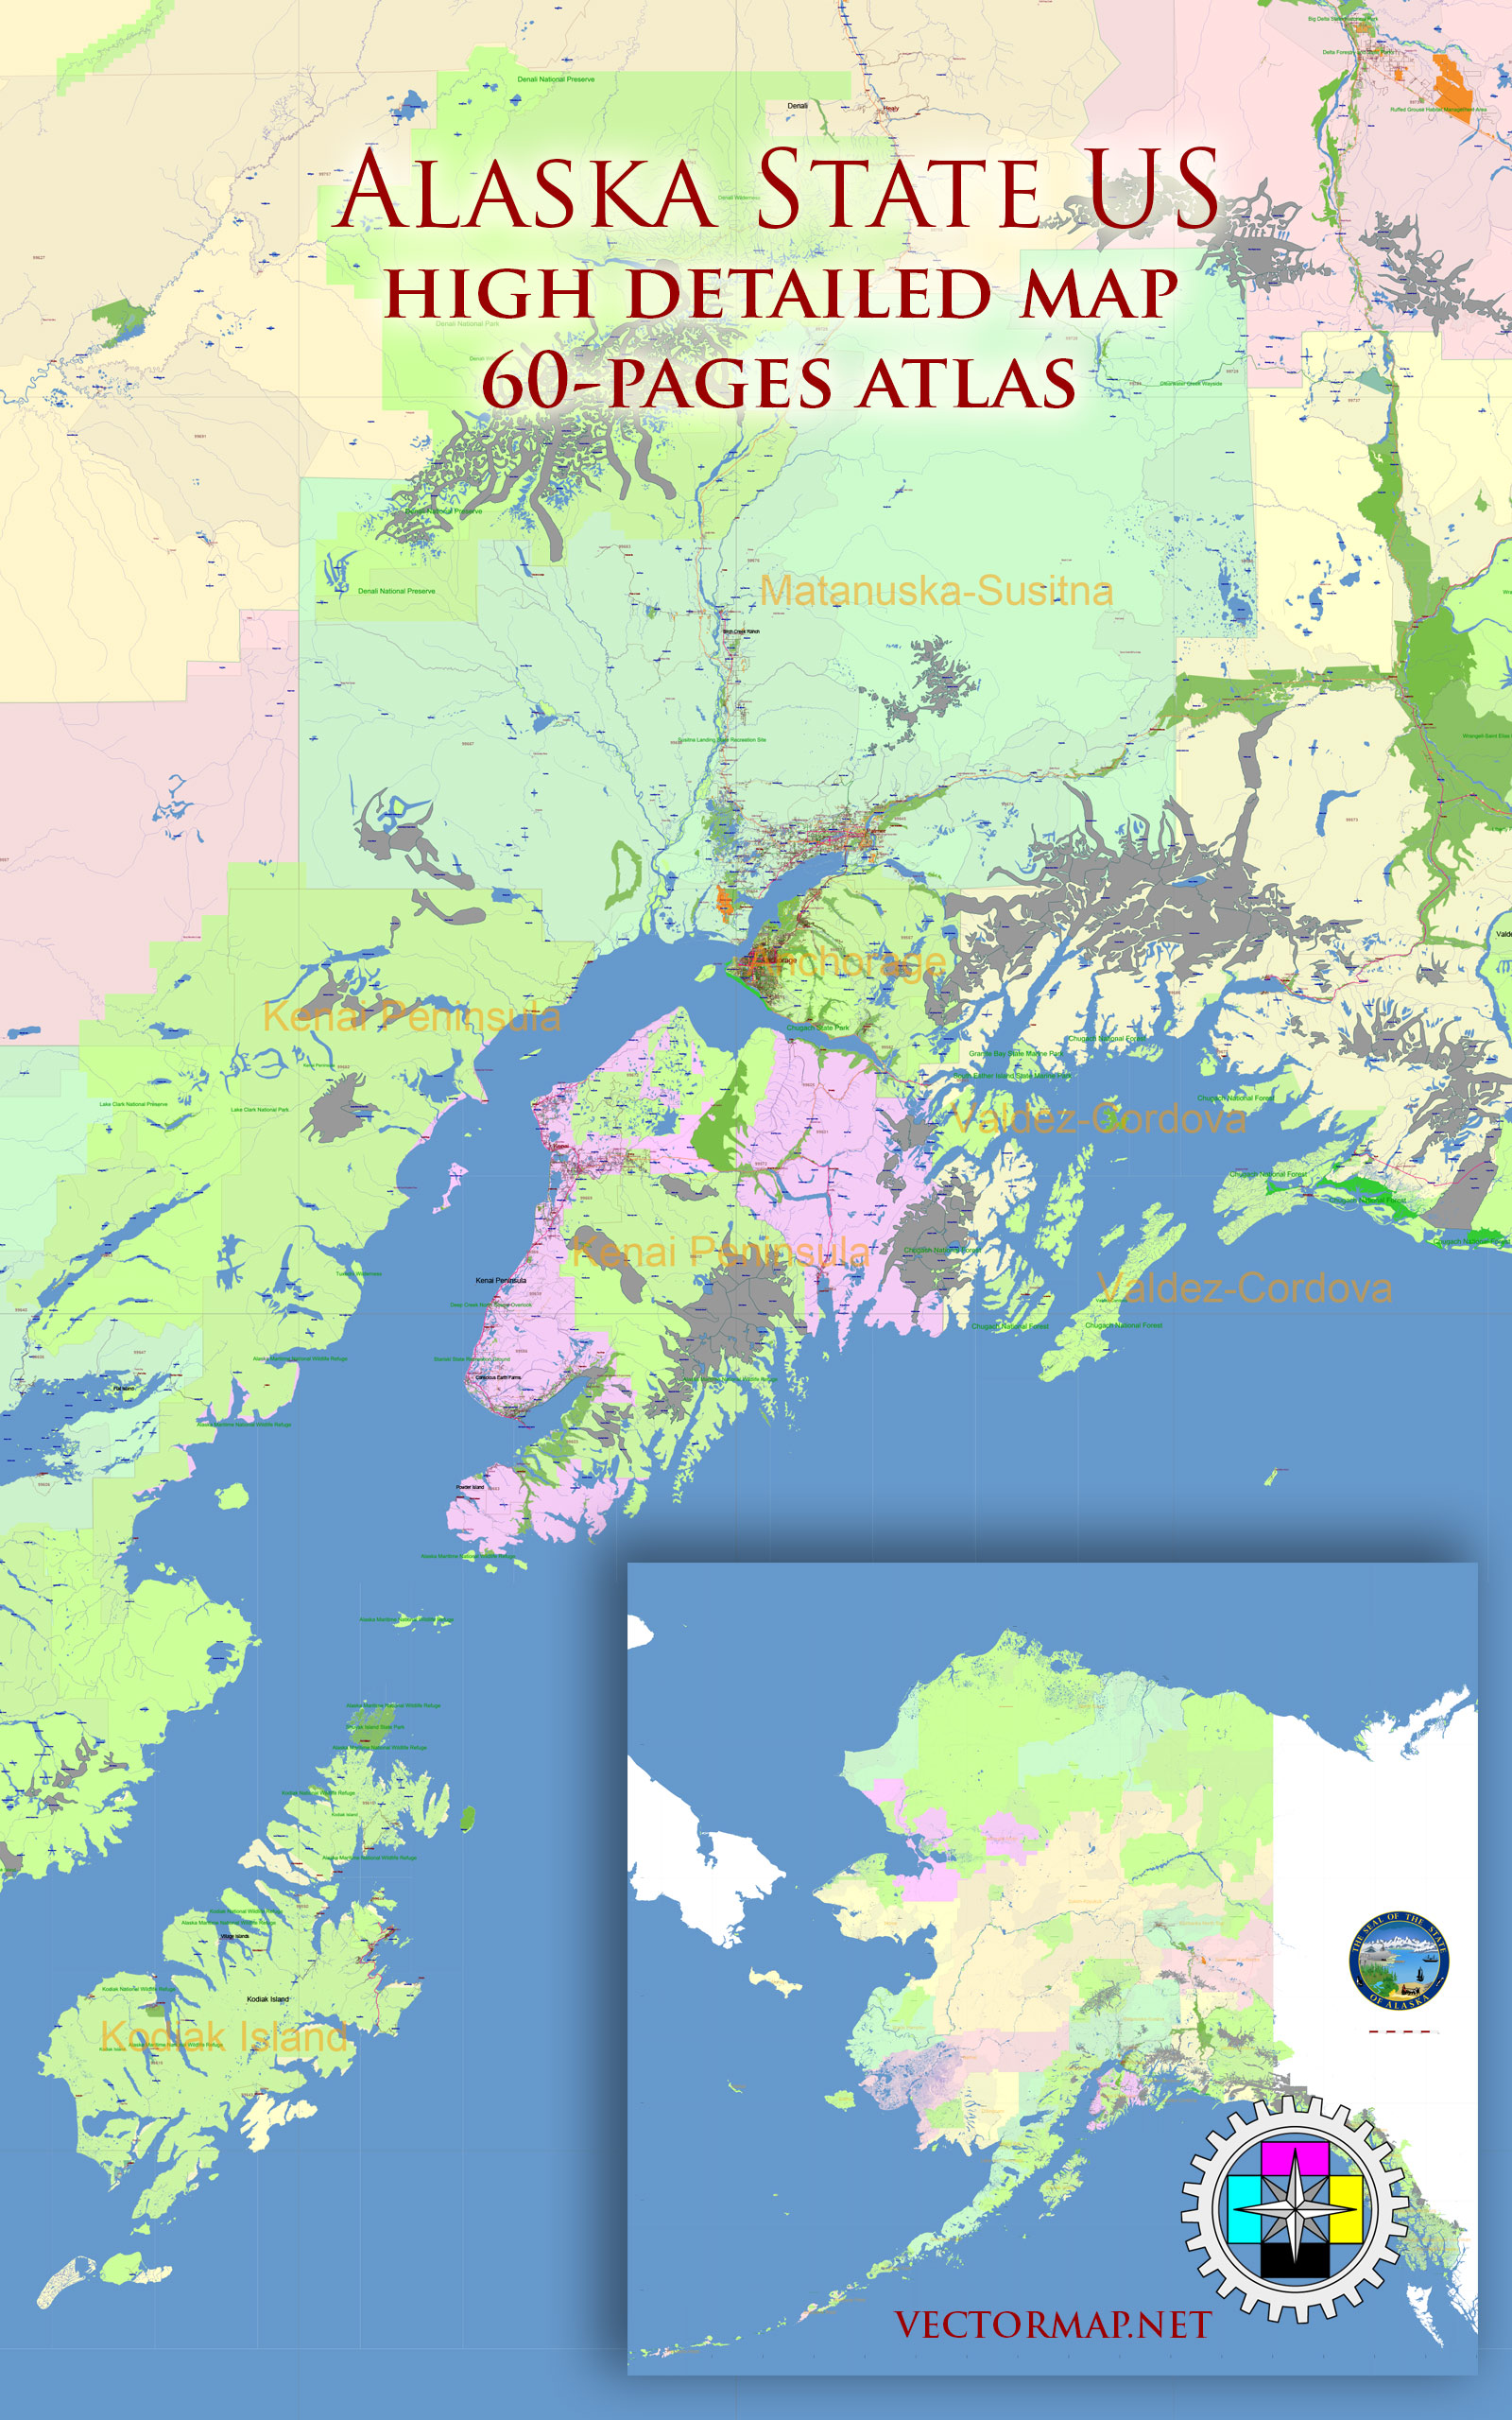 Alaska State US Tourist Map multi-page atlas, contains 60 pages vector PDF